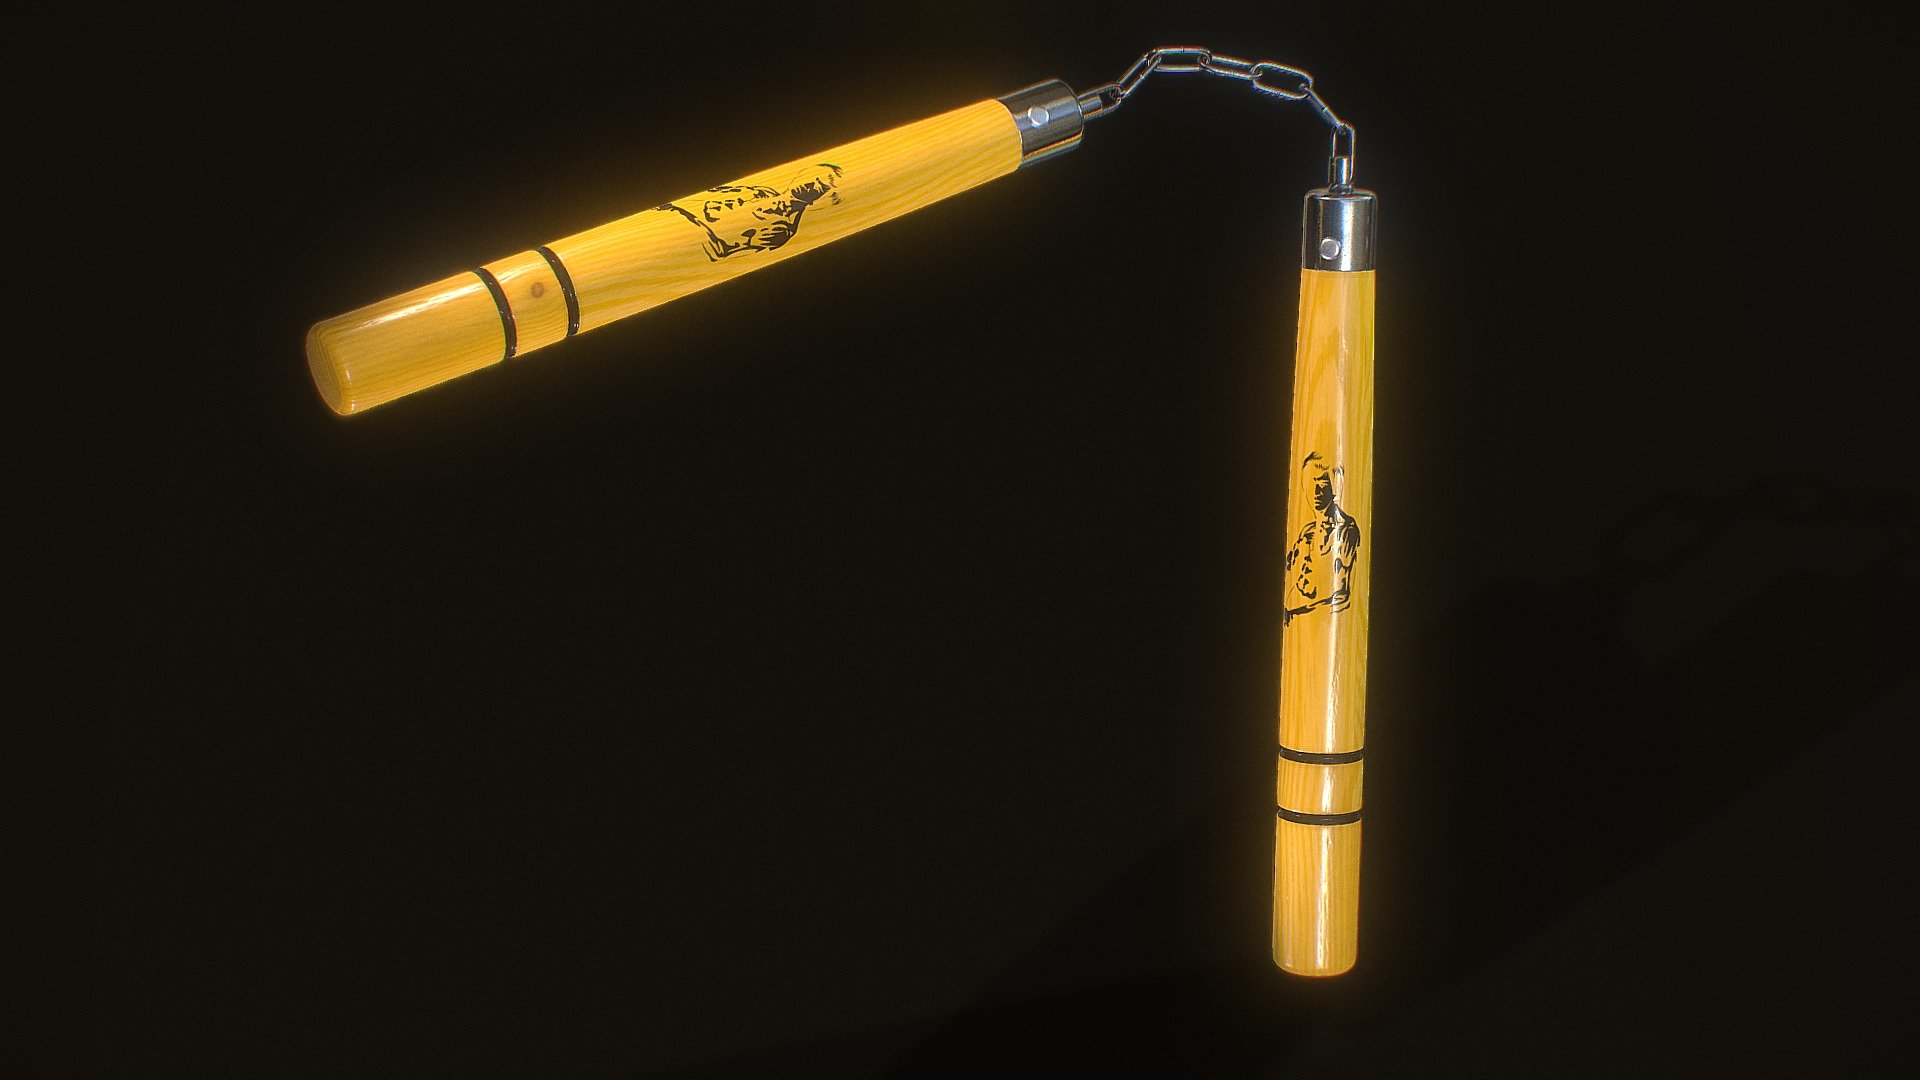 3d model of a Nunchaku for using in handheld weapon. It can be animated as an melee attacking weapon in games and many other render scenes.

This model is created in Maya and textured in Substance 3d painter.

It is made in real-proportions.

High quality textures are available to download.

Metallic-roughness workflow which includes - Diffuse, AO, Metallic, Roughness and Normal Maps 3d model